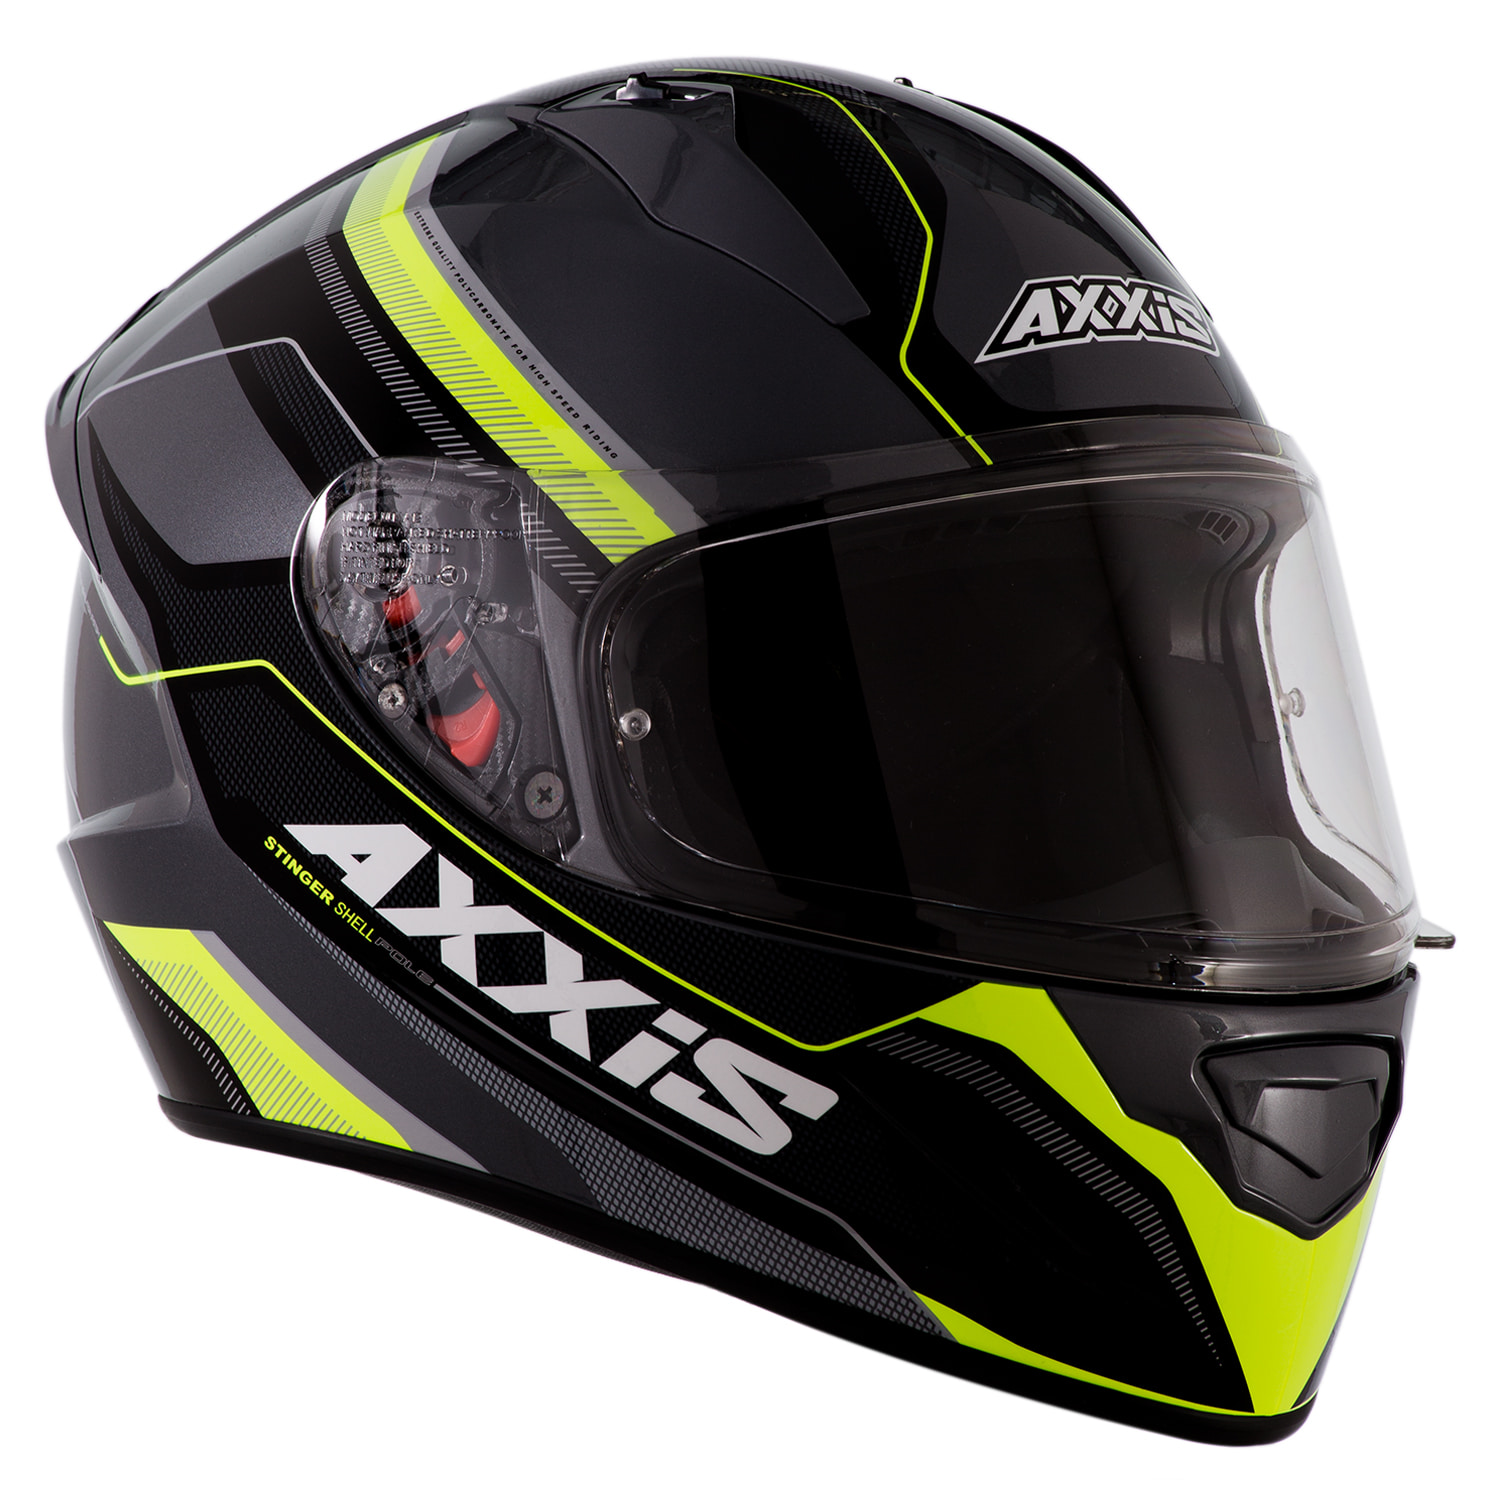 Axxis Stinger Pole